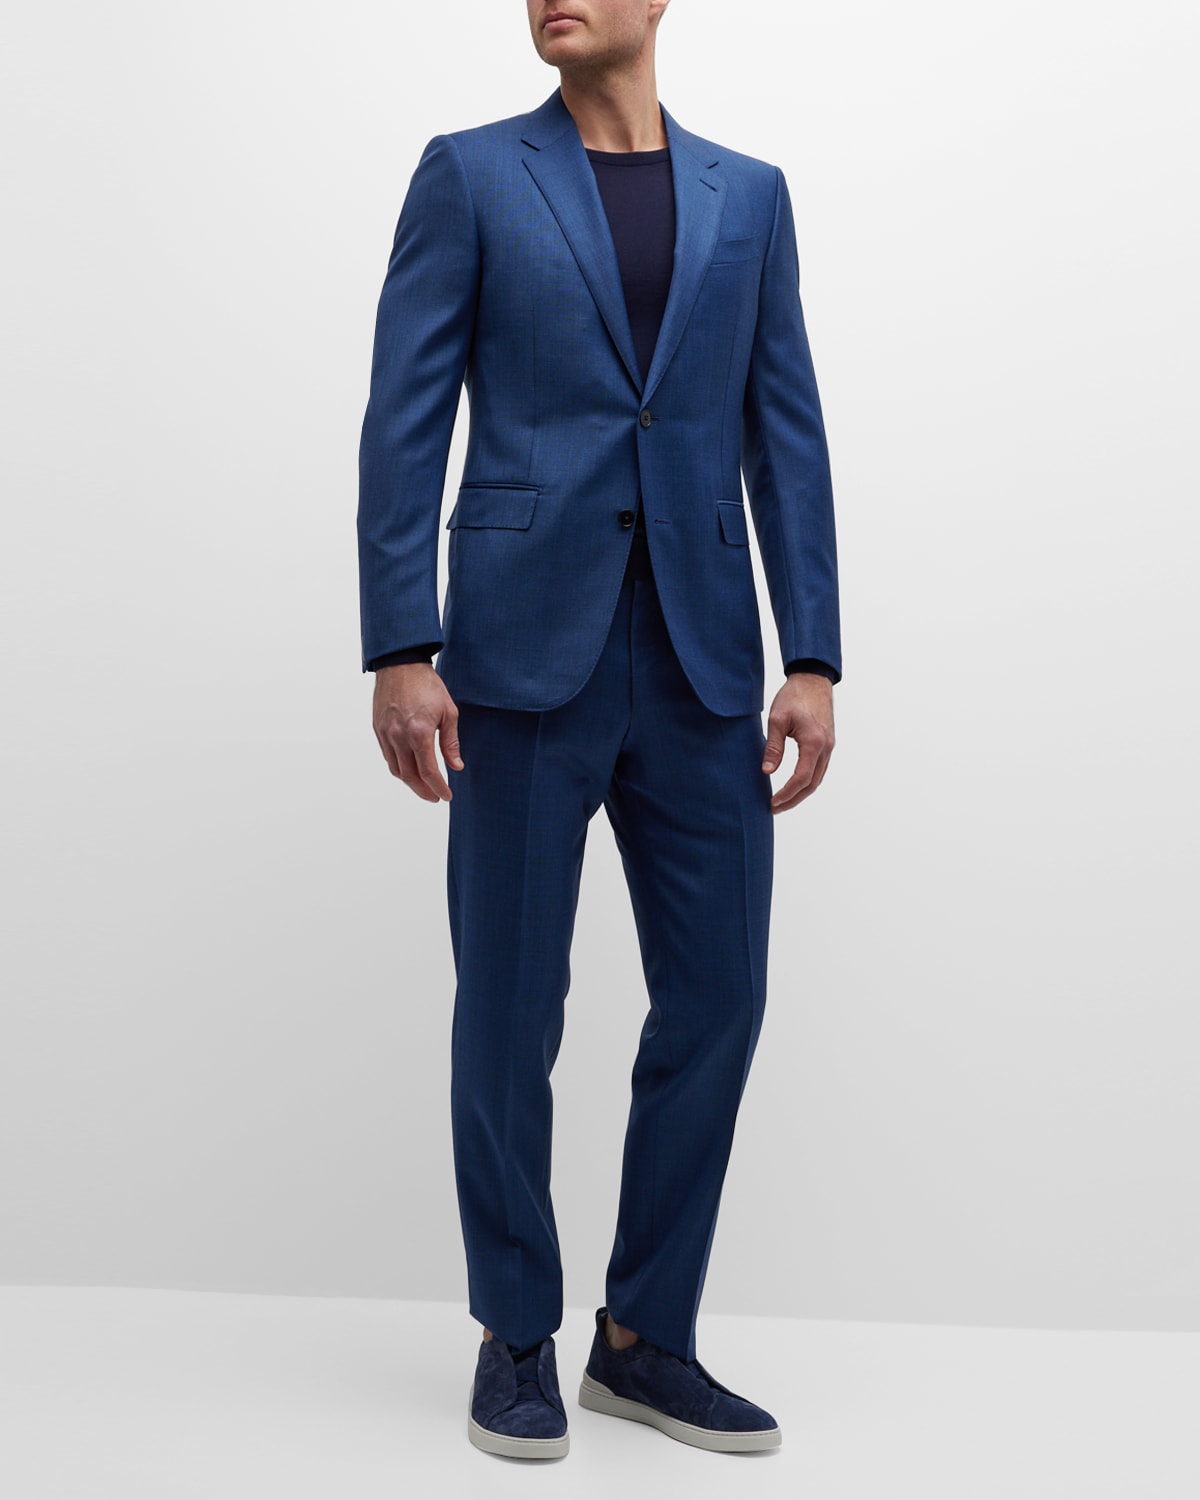 Zegna Men's Solid Wool Classic-fit Suit In Navy Solid